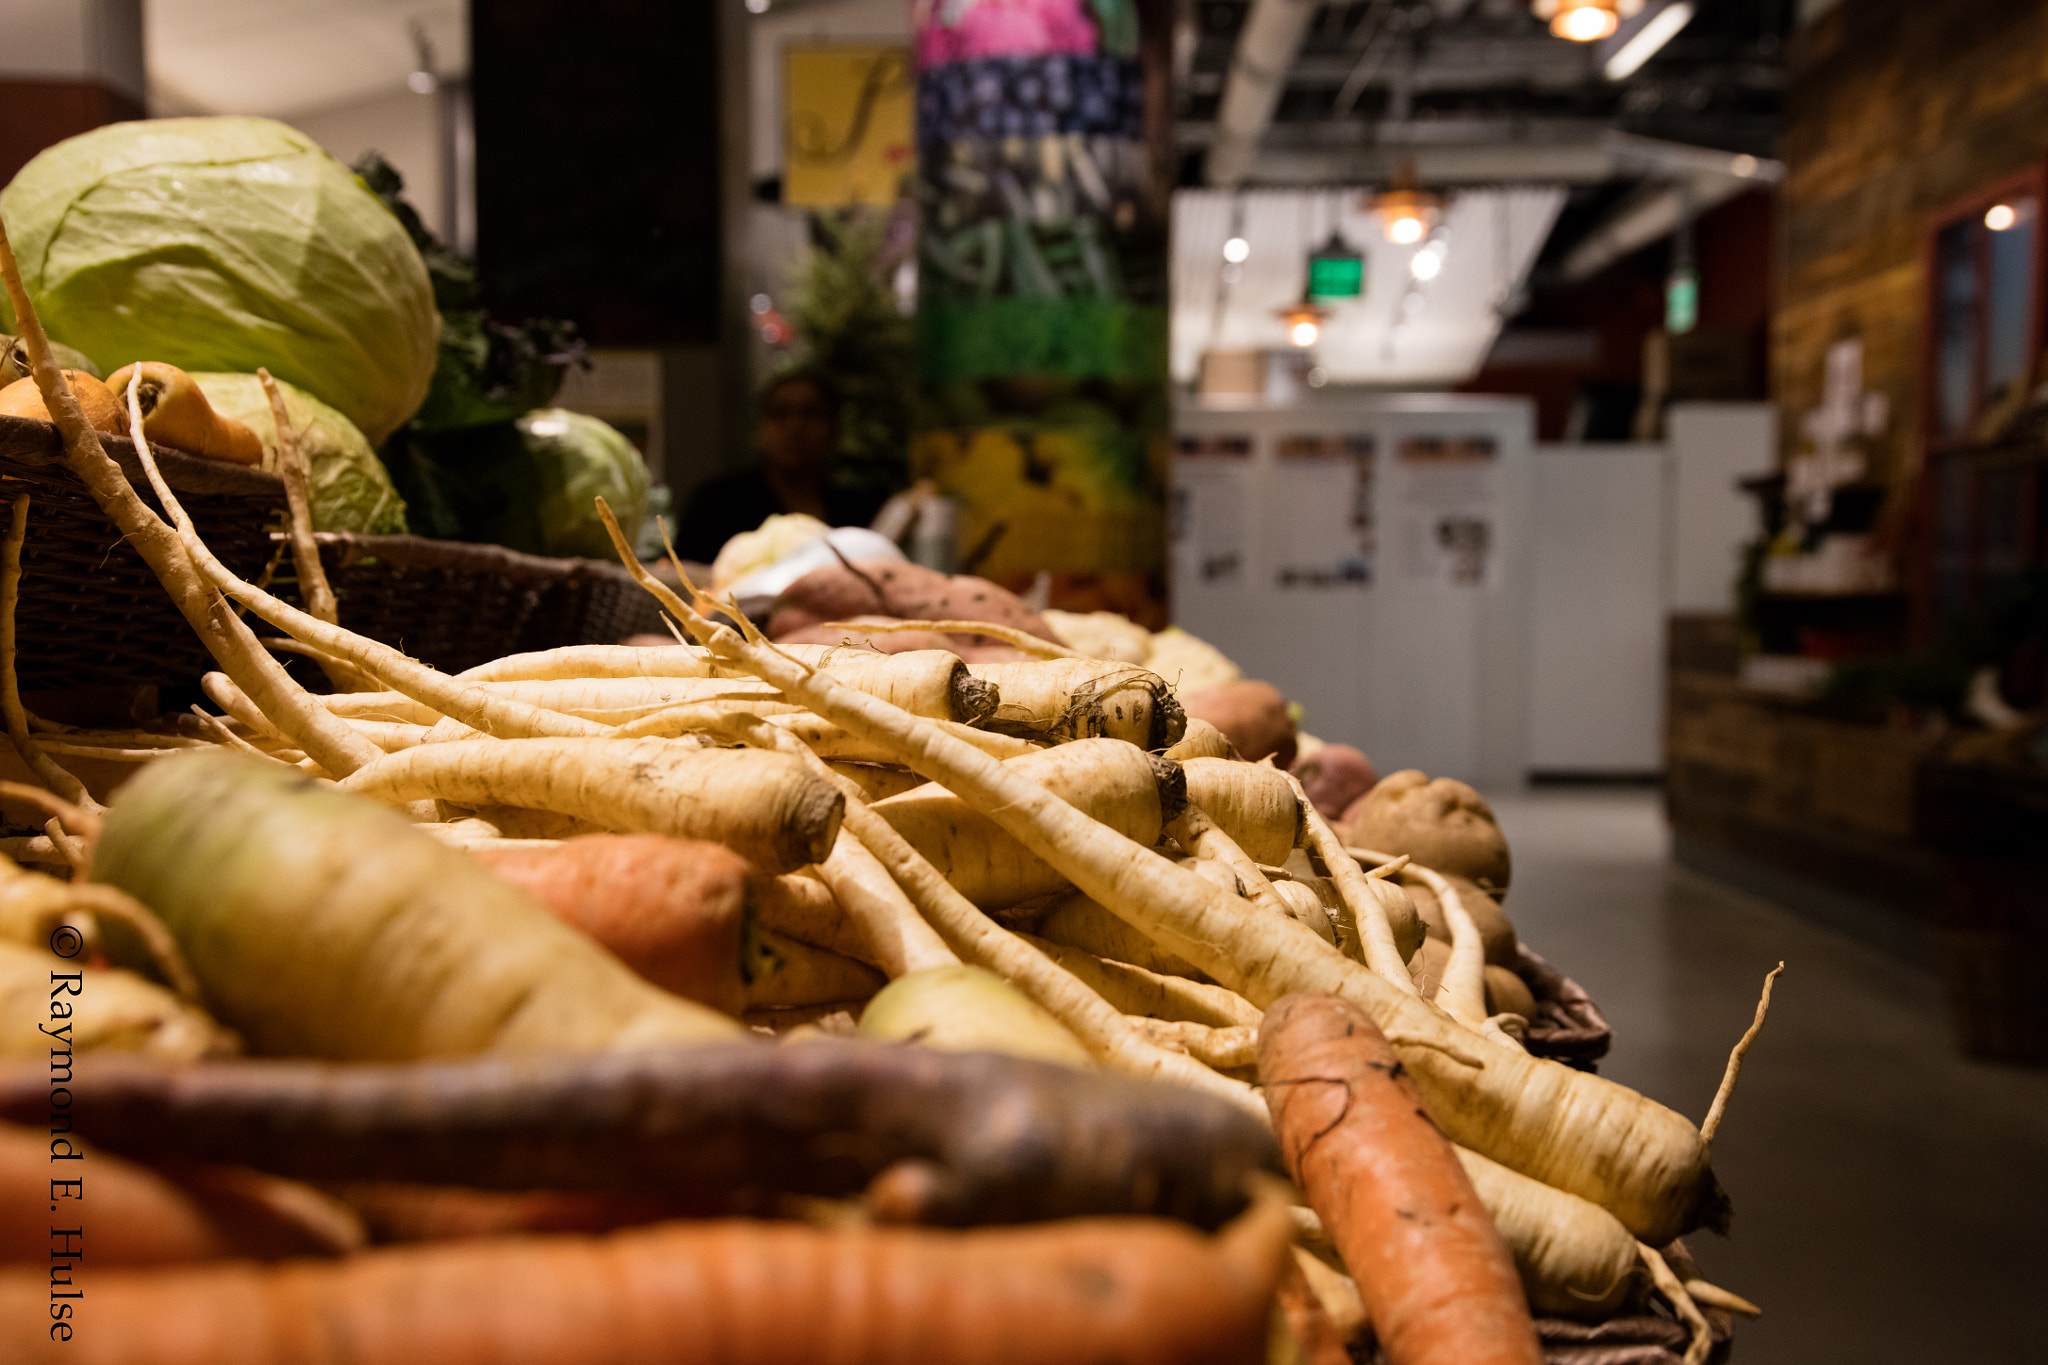 Canon EOS 5DS R + Sigma 24-105mm f/4 DG OS HSM | A sample photo. Parsnips! photography